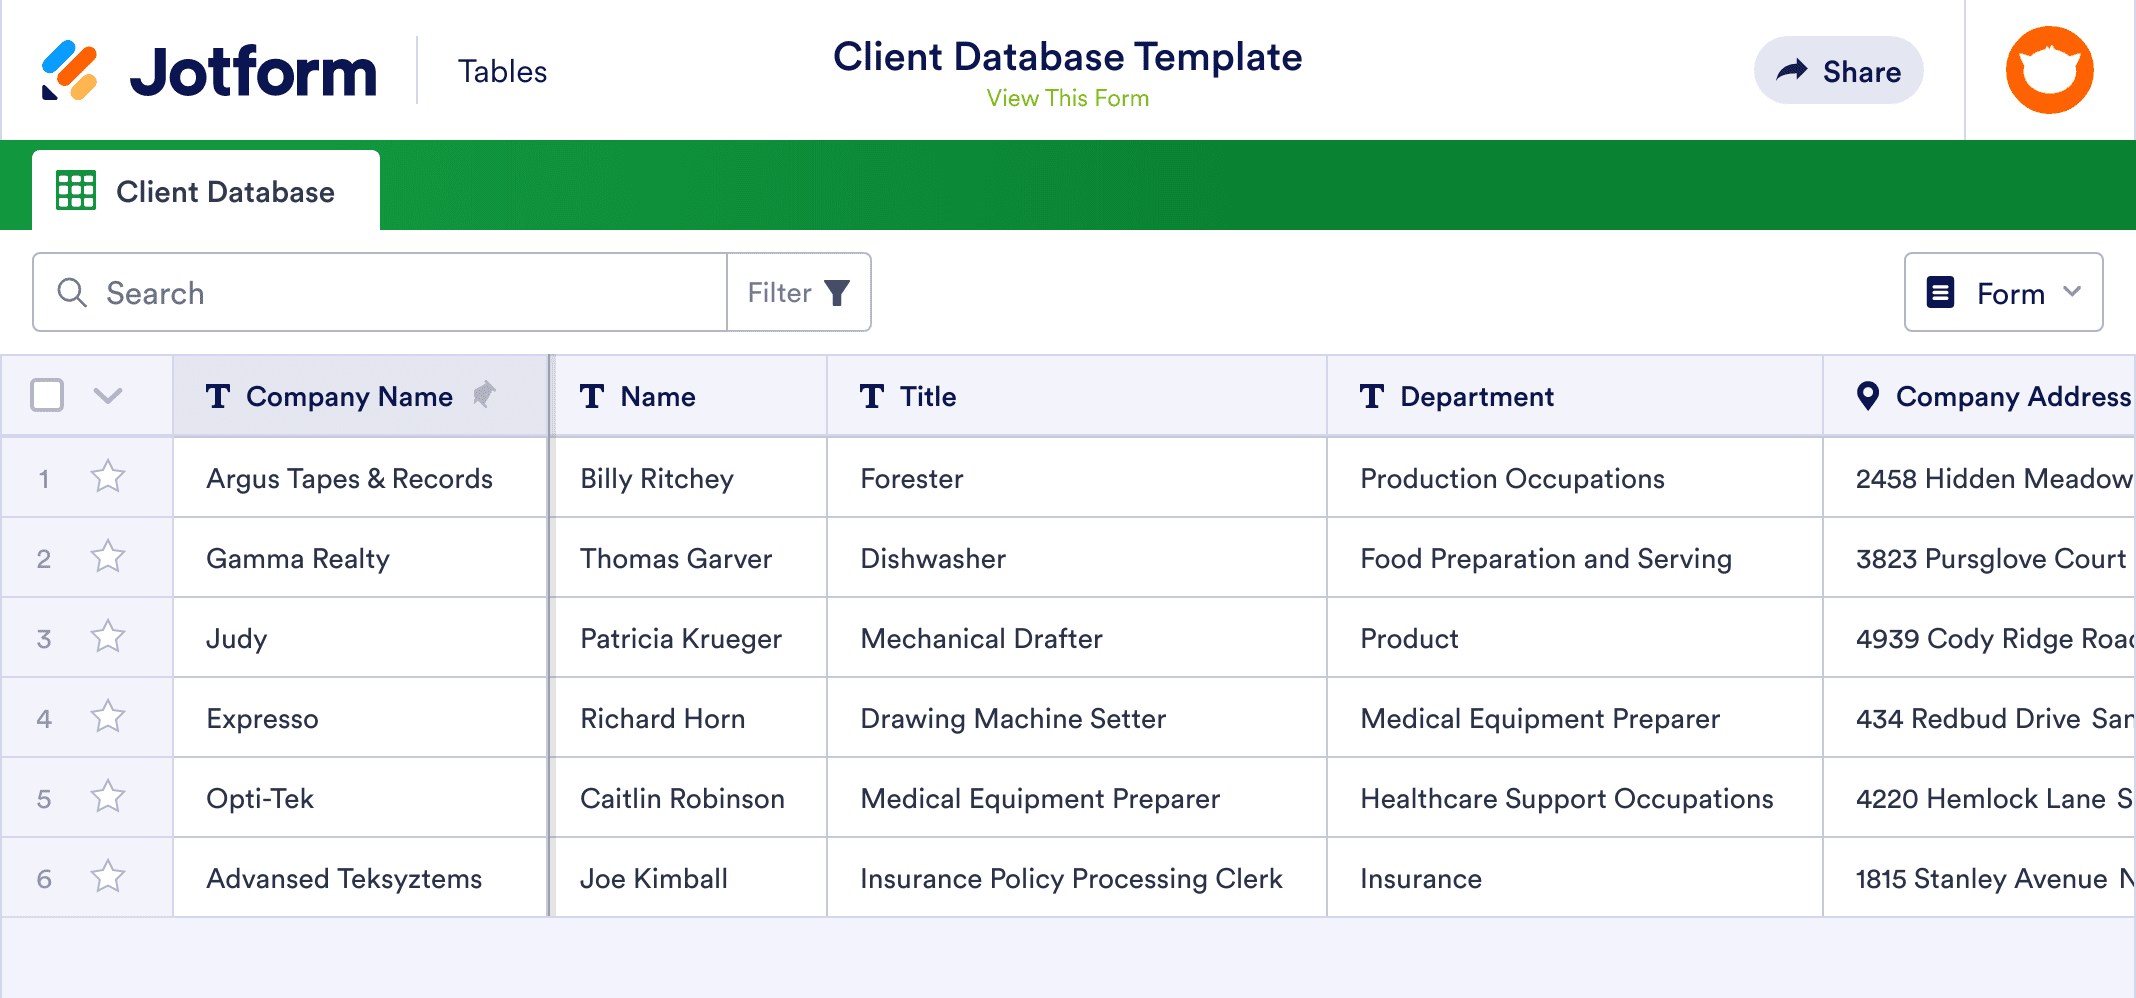 Client Database Template  Jotform Tables For Small Business Access Database Template